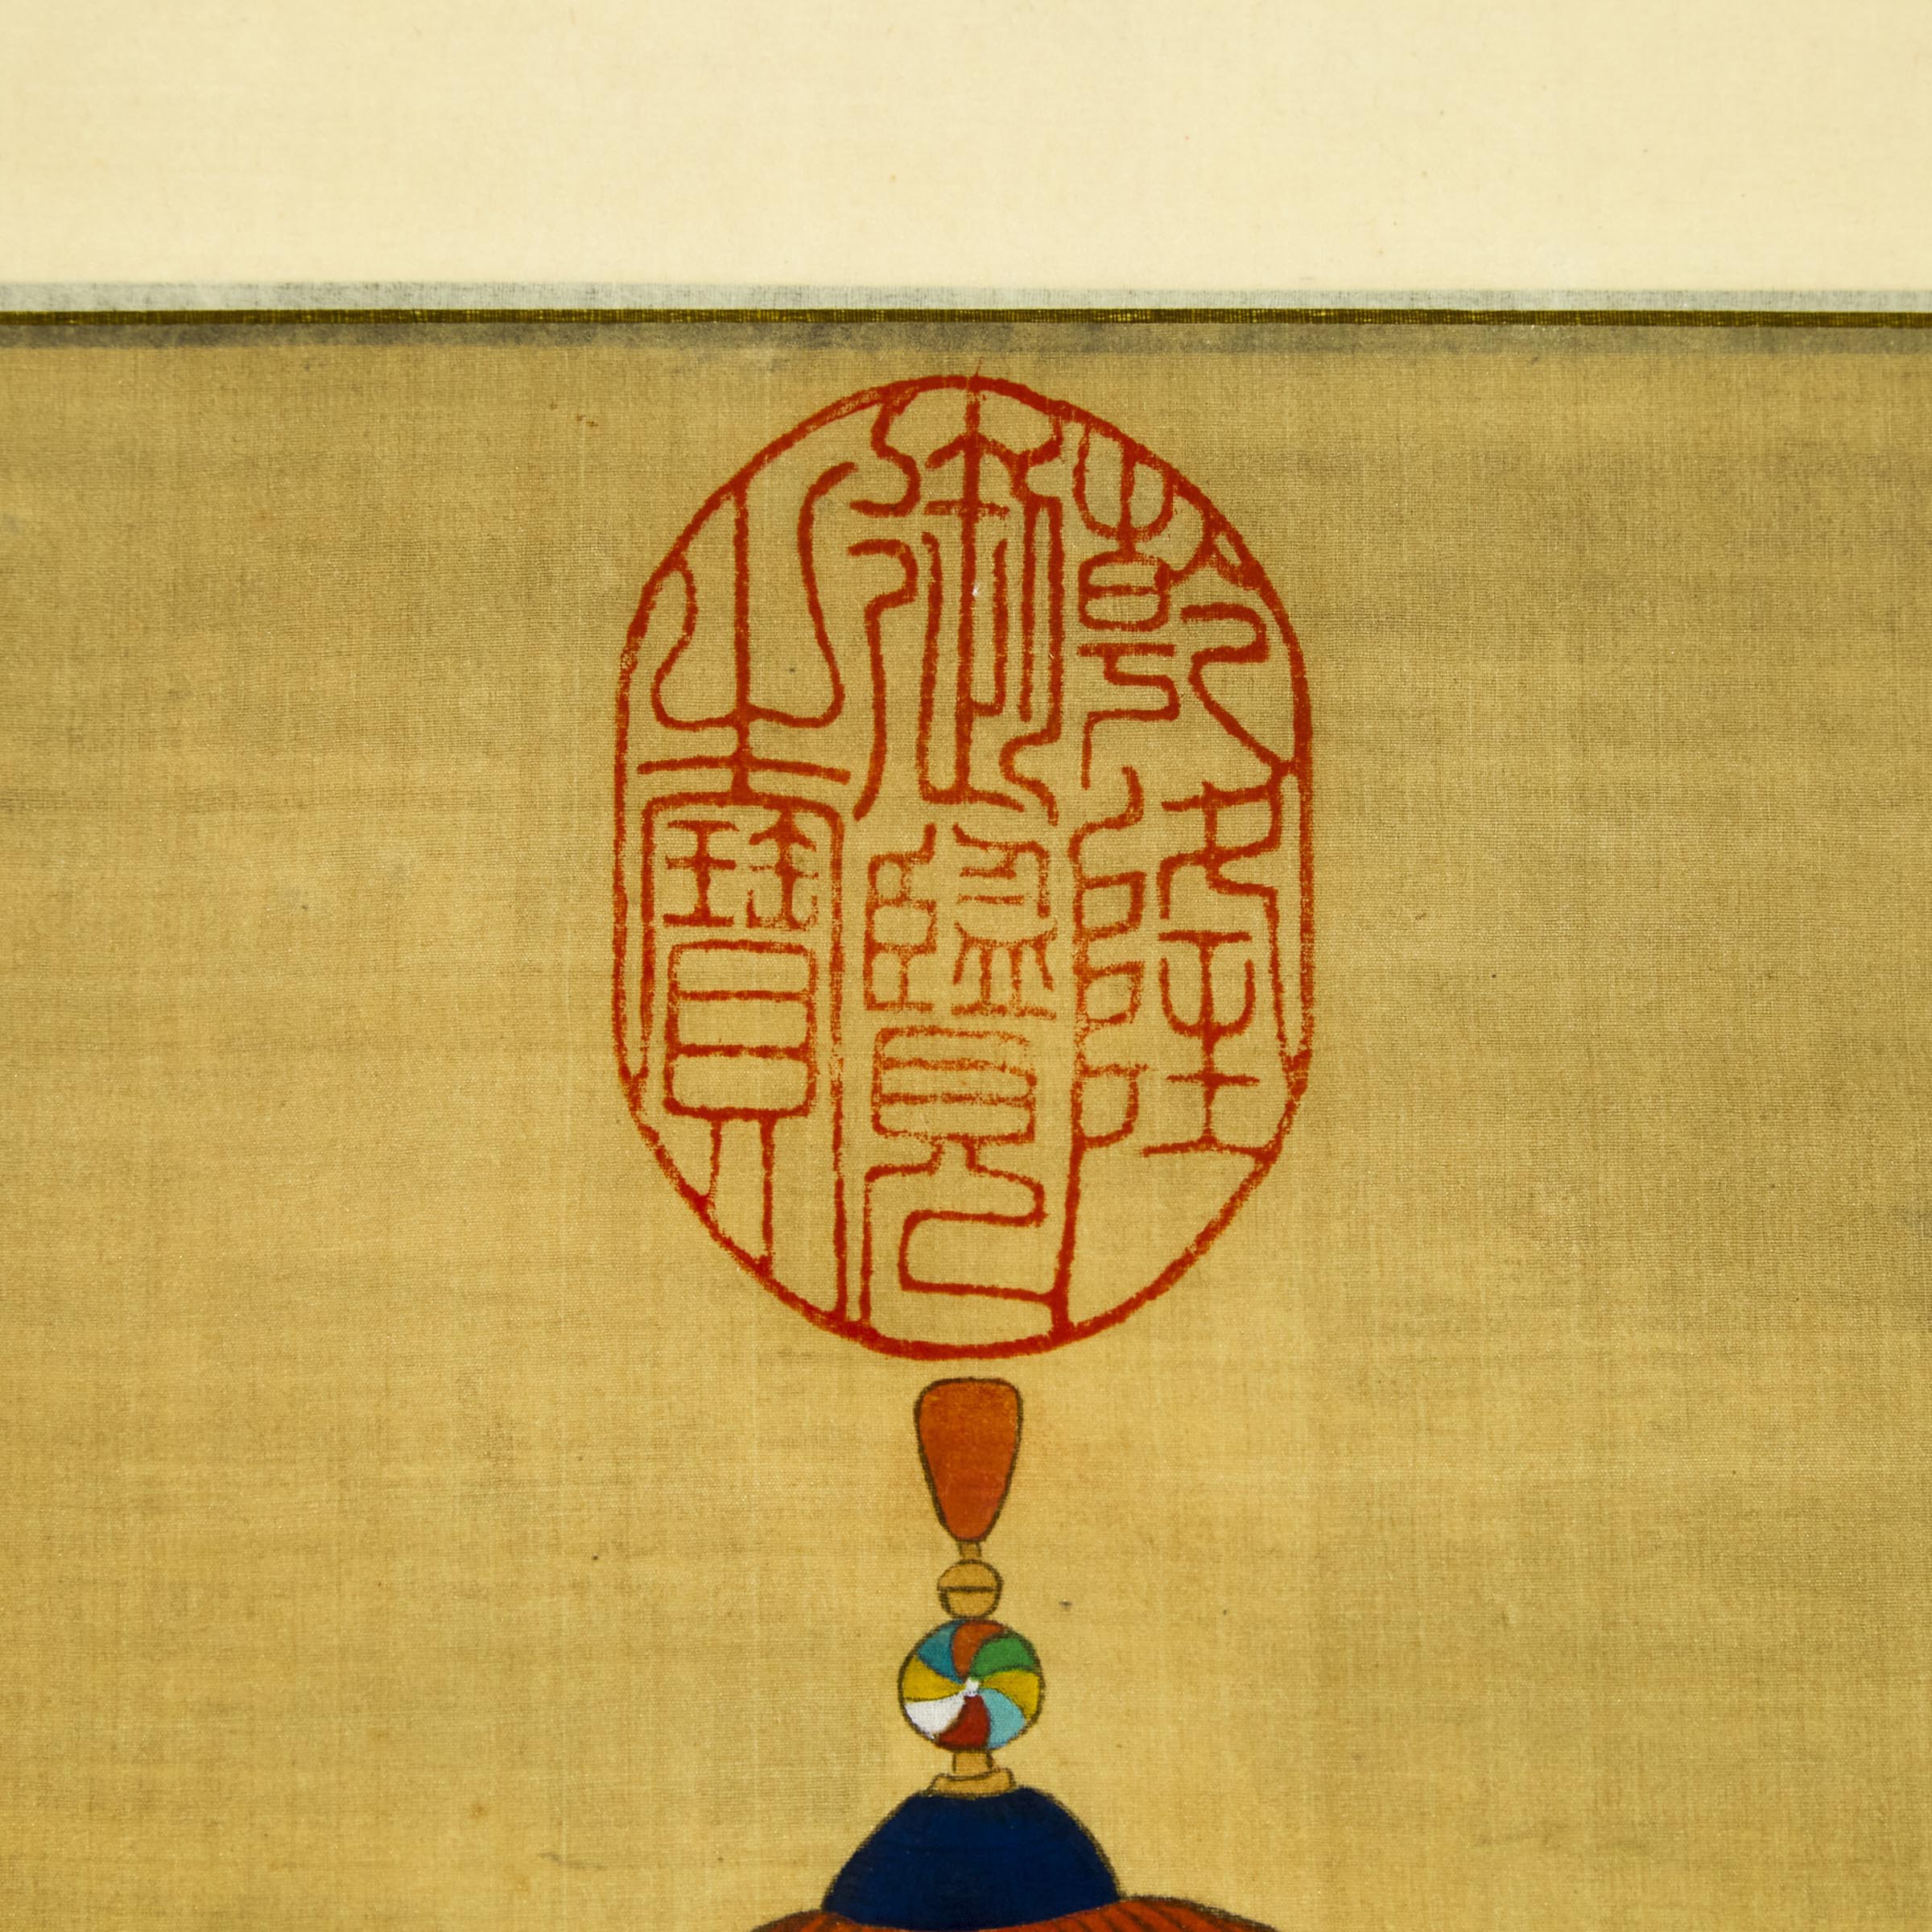 A Chinese Ancestor Portrait on Silk, Dated 1916